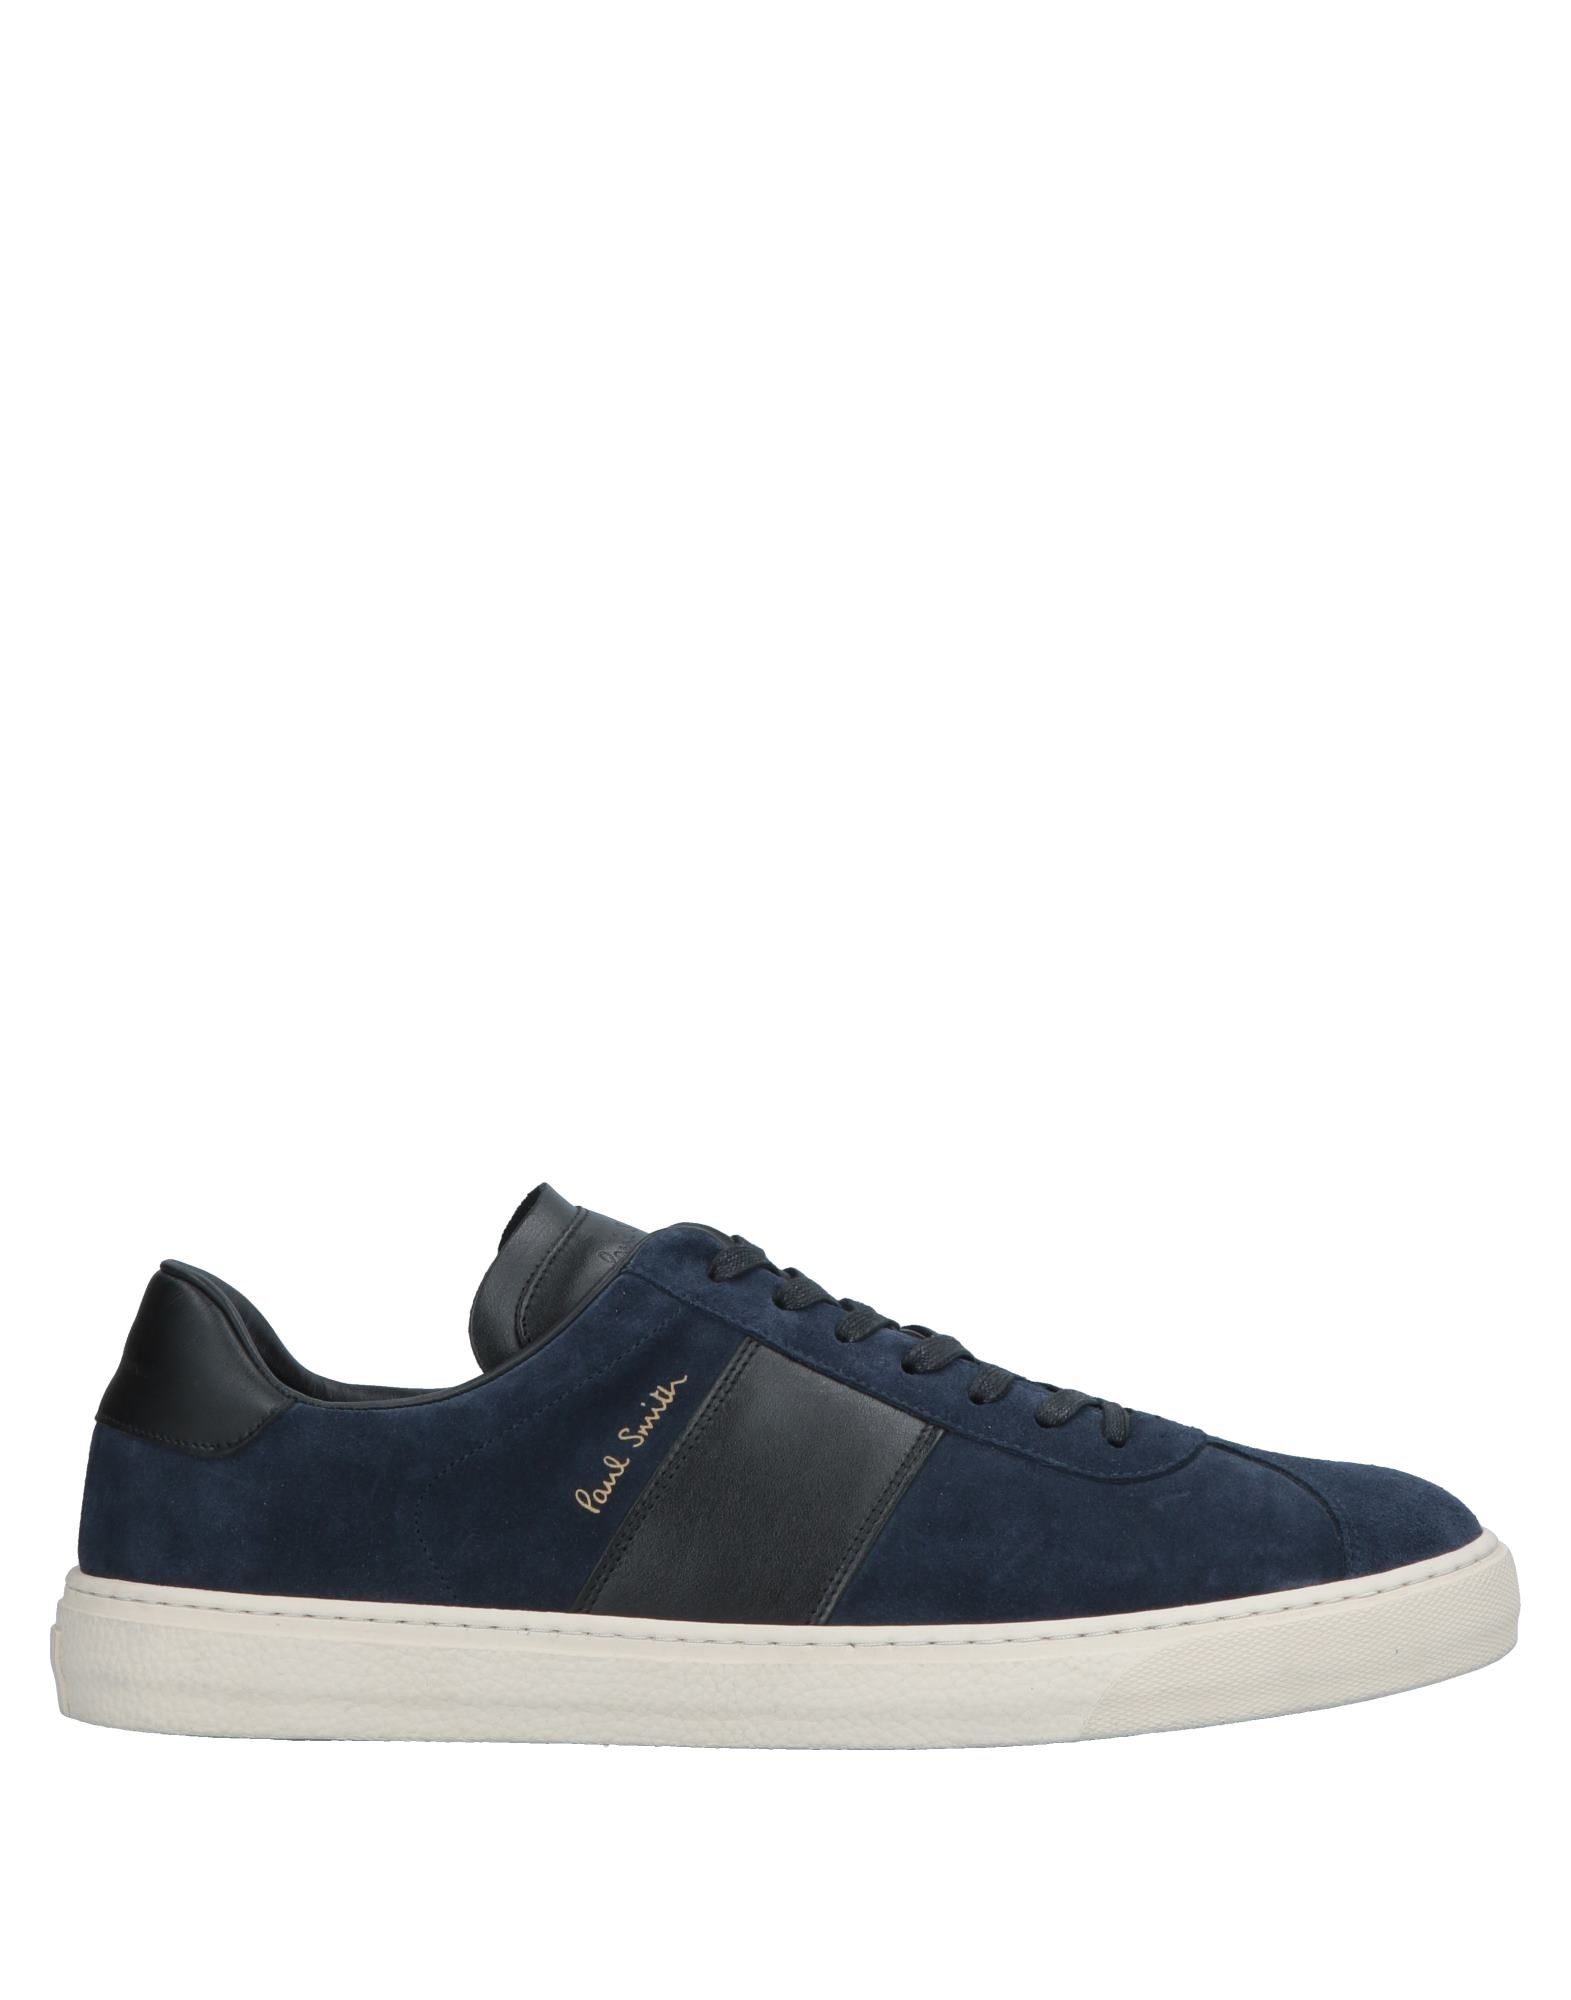 PAUL SMITH SNEAKERS,11584671IF 11